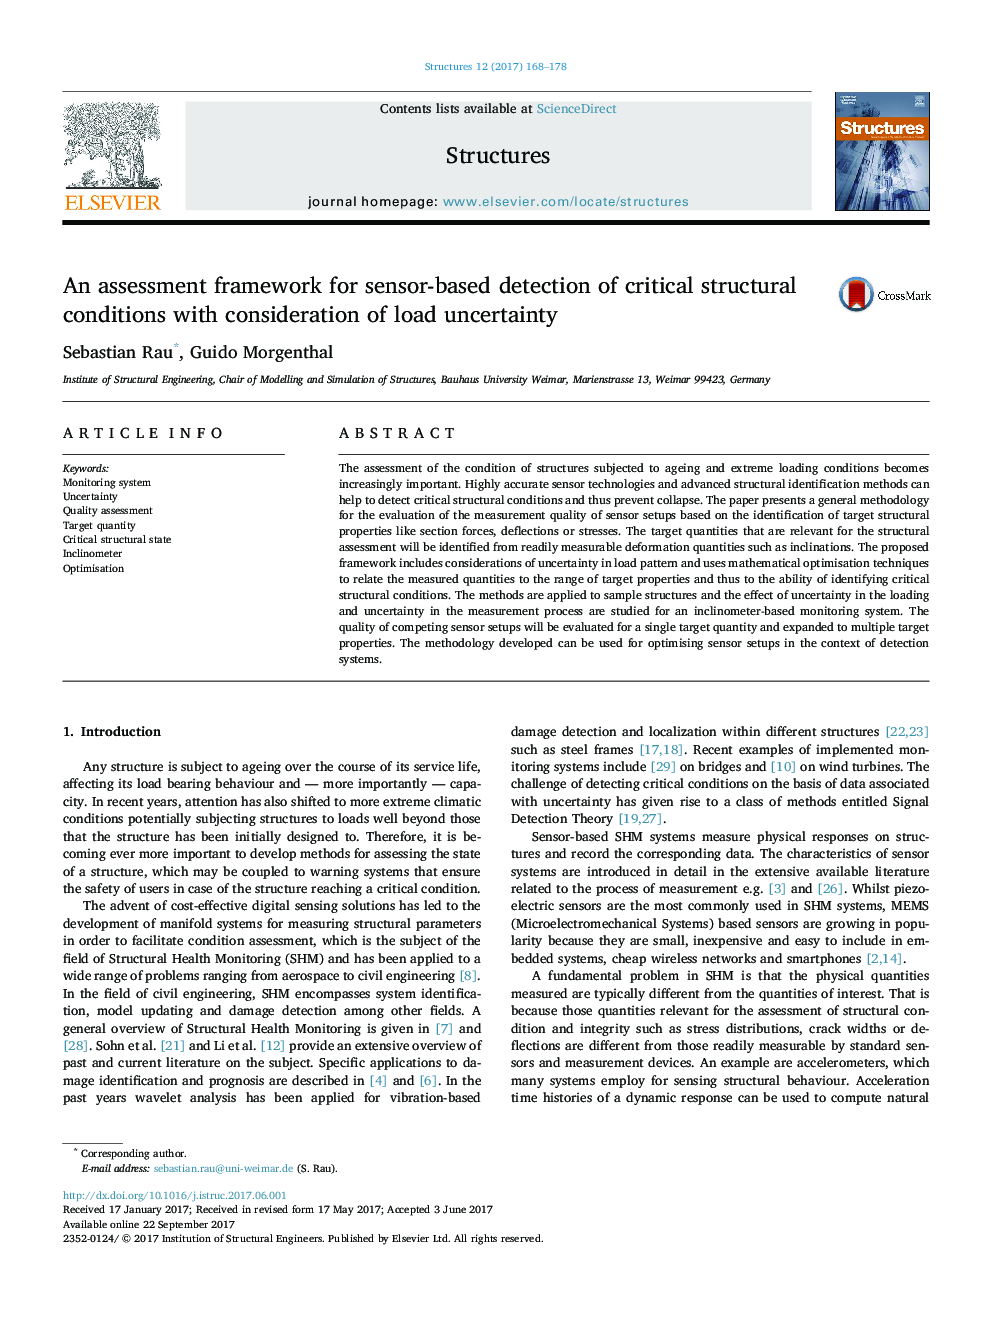 An assessment framework for sensor-based detection of critical structural conditions with consideration of load uncertainty